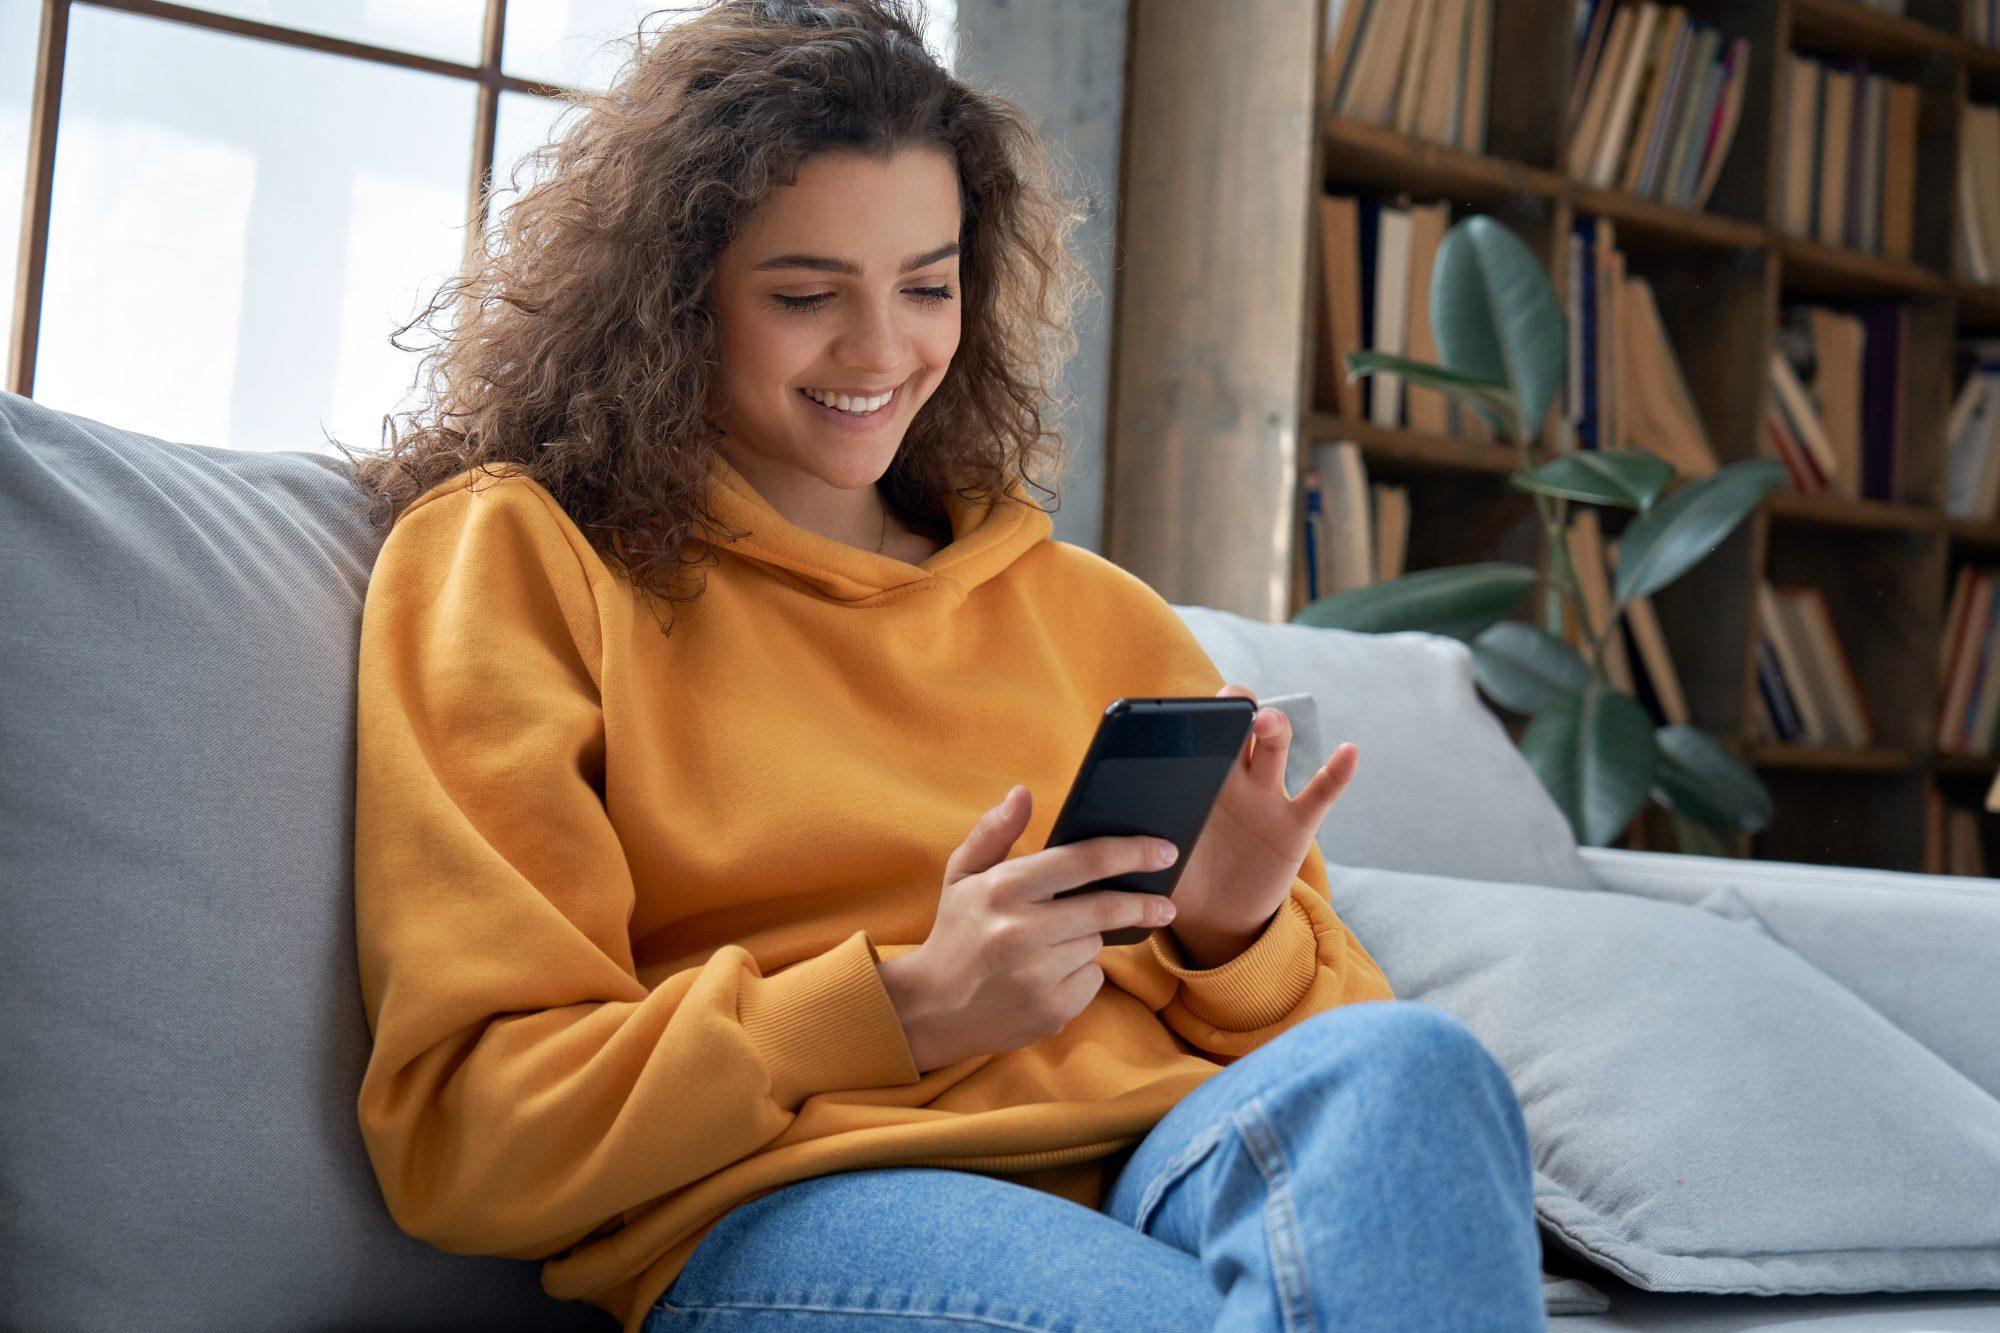 A female on the couch looking through her phone while smiling.